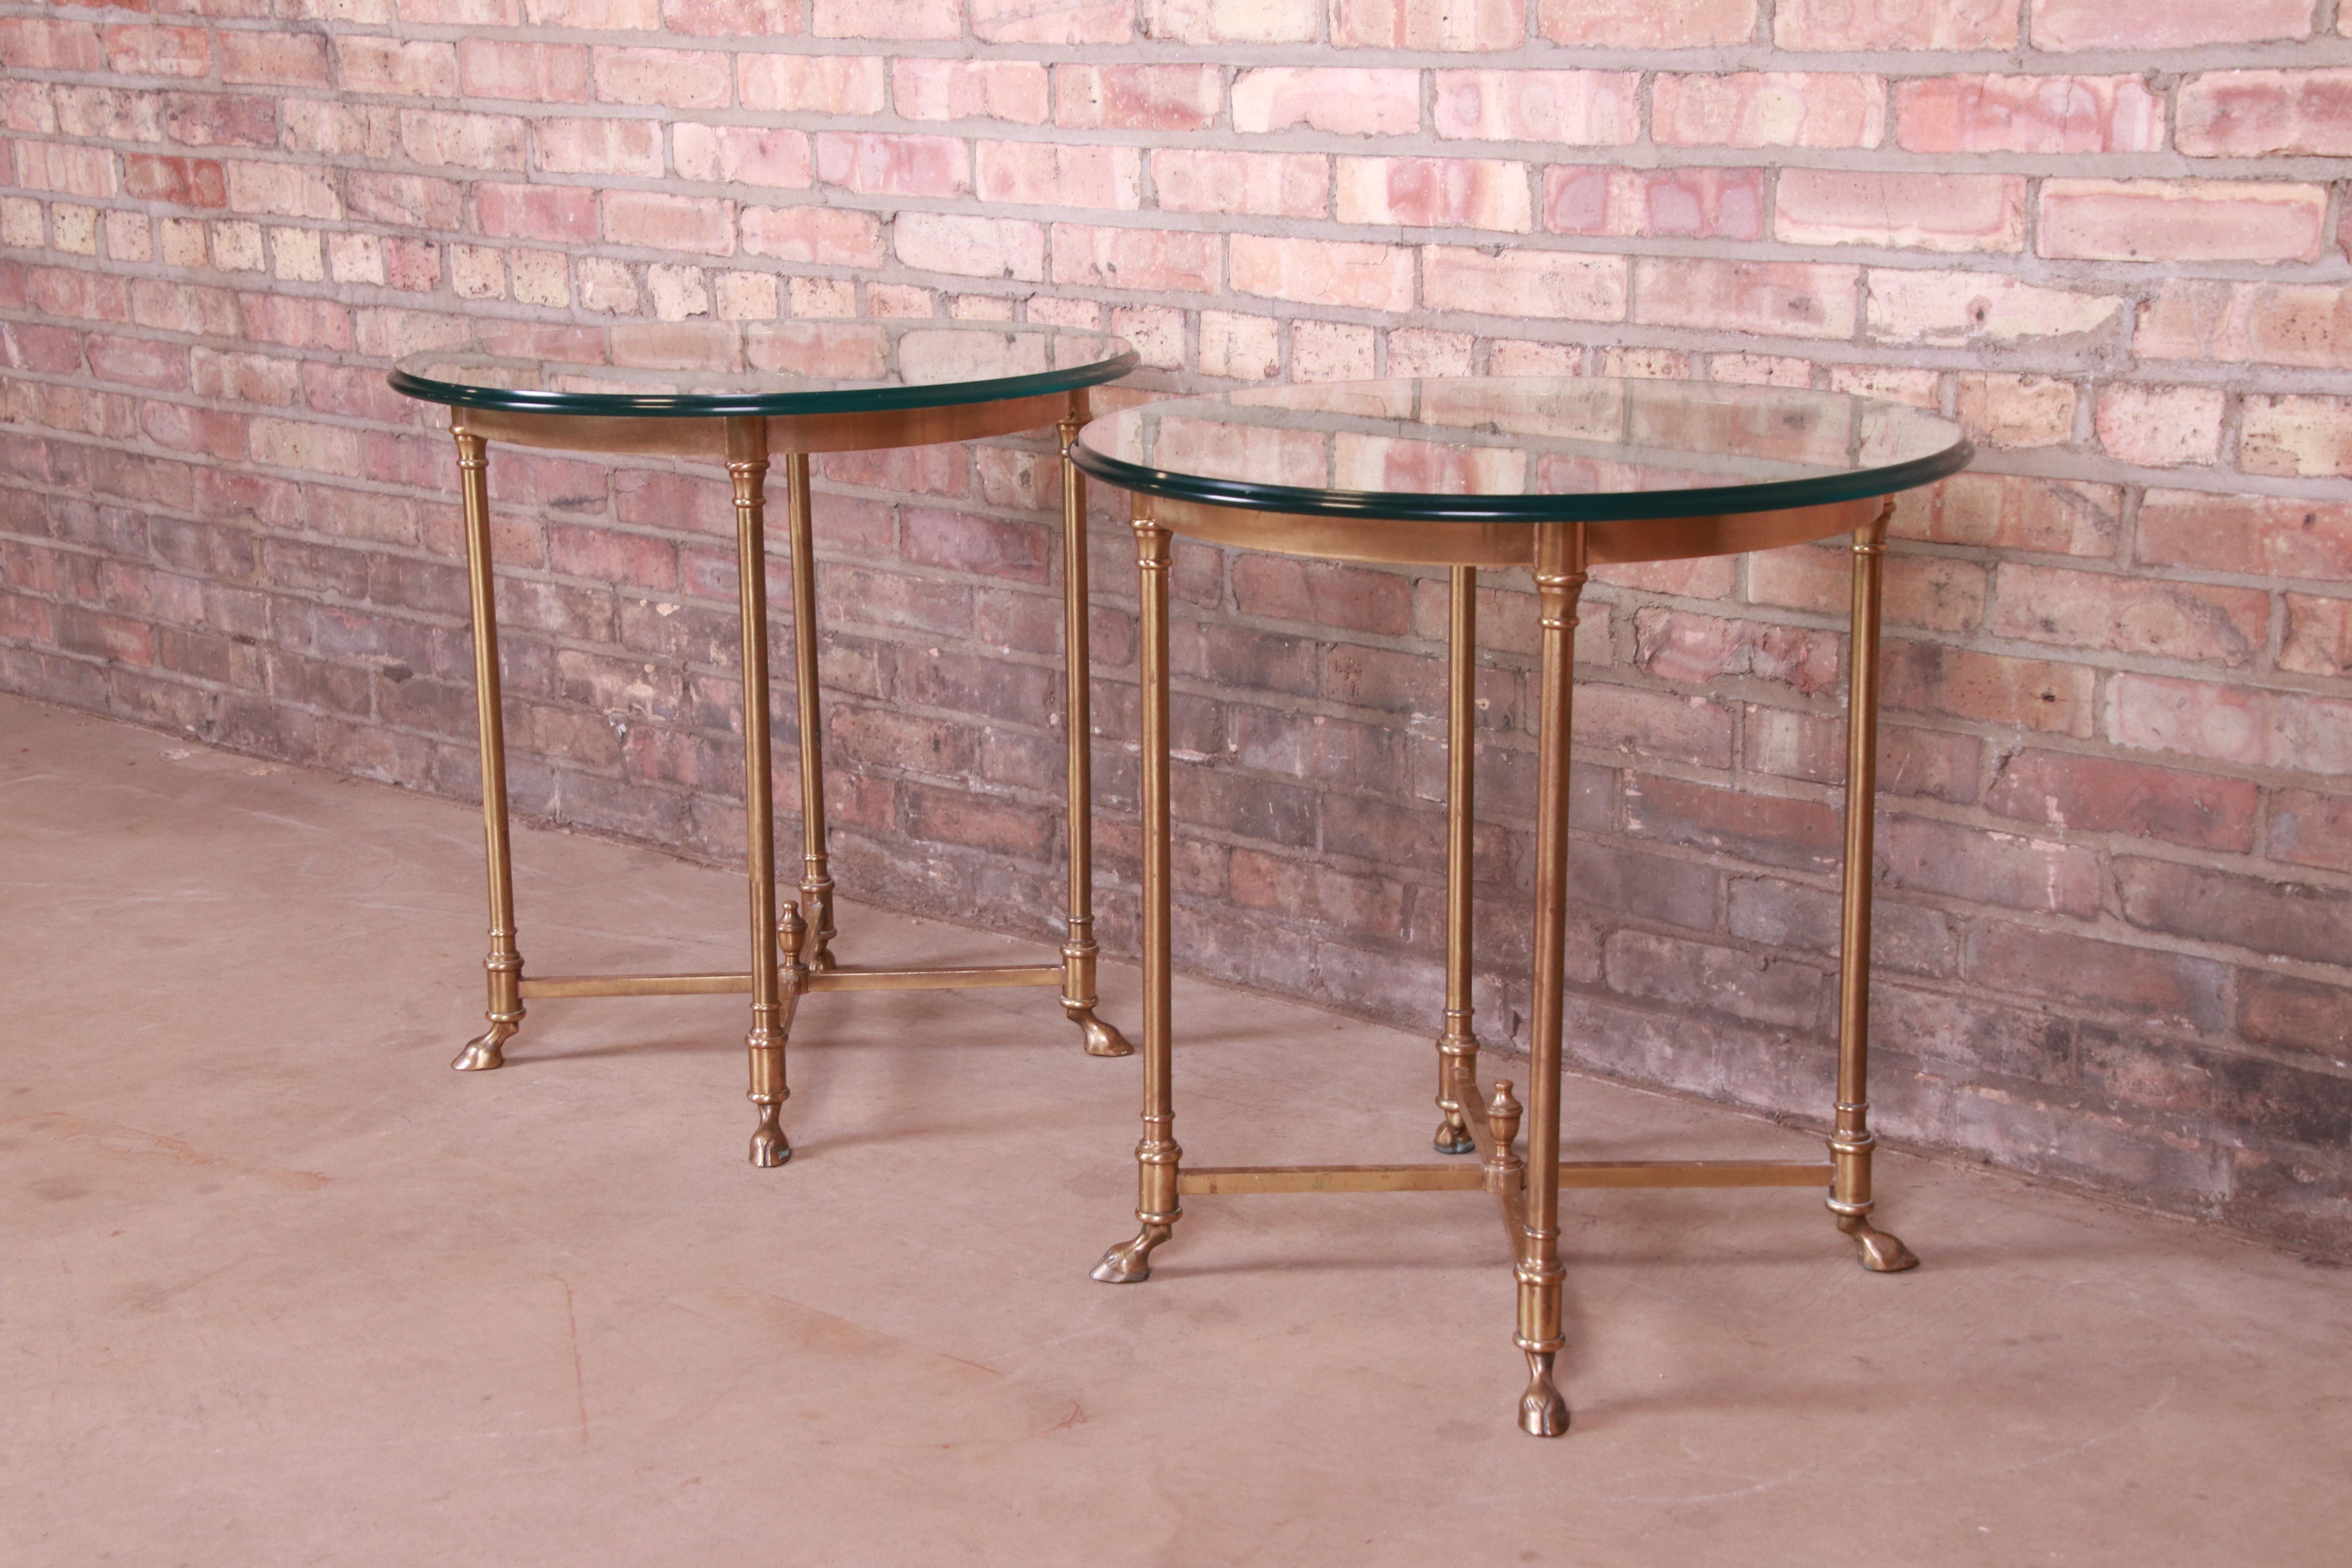 Beveled Labarge Italian Hollywood Regency Brass and Glass Side Tables with Hooved Feet